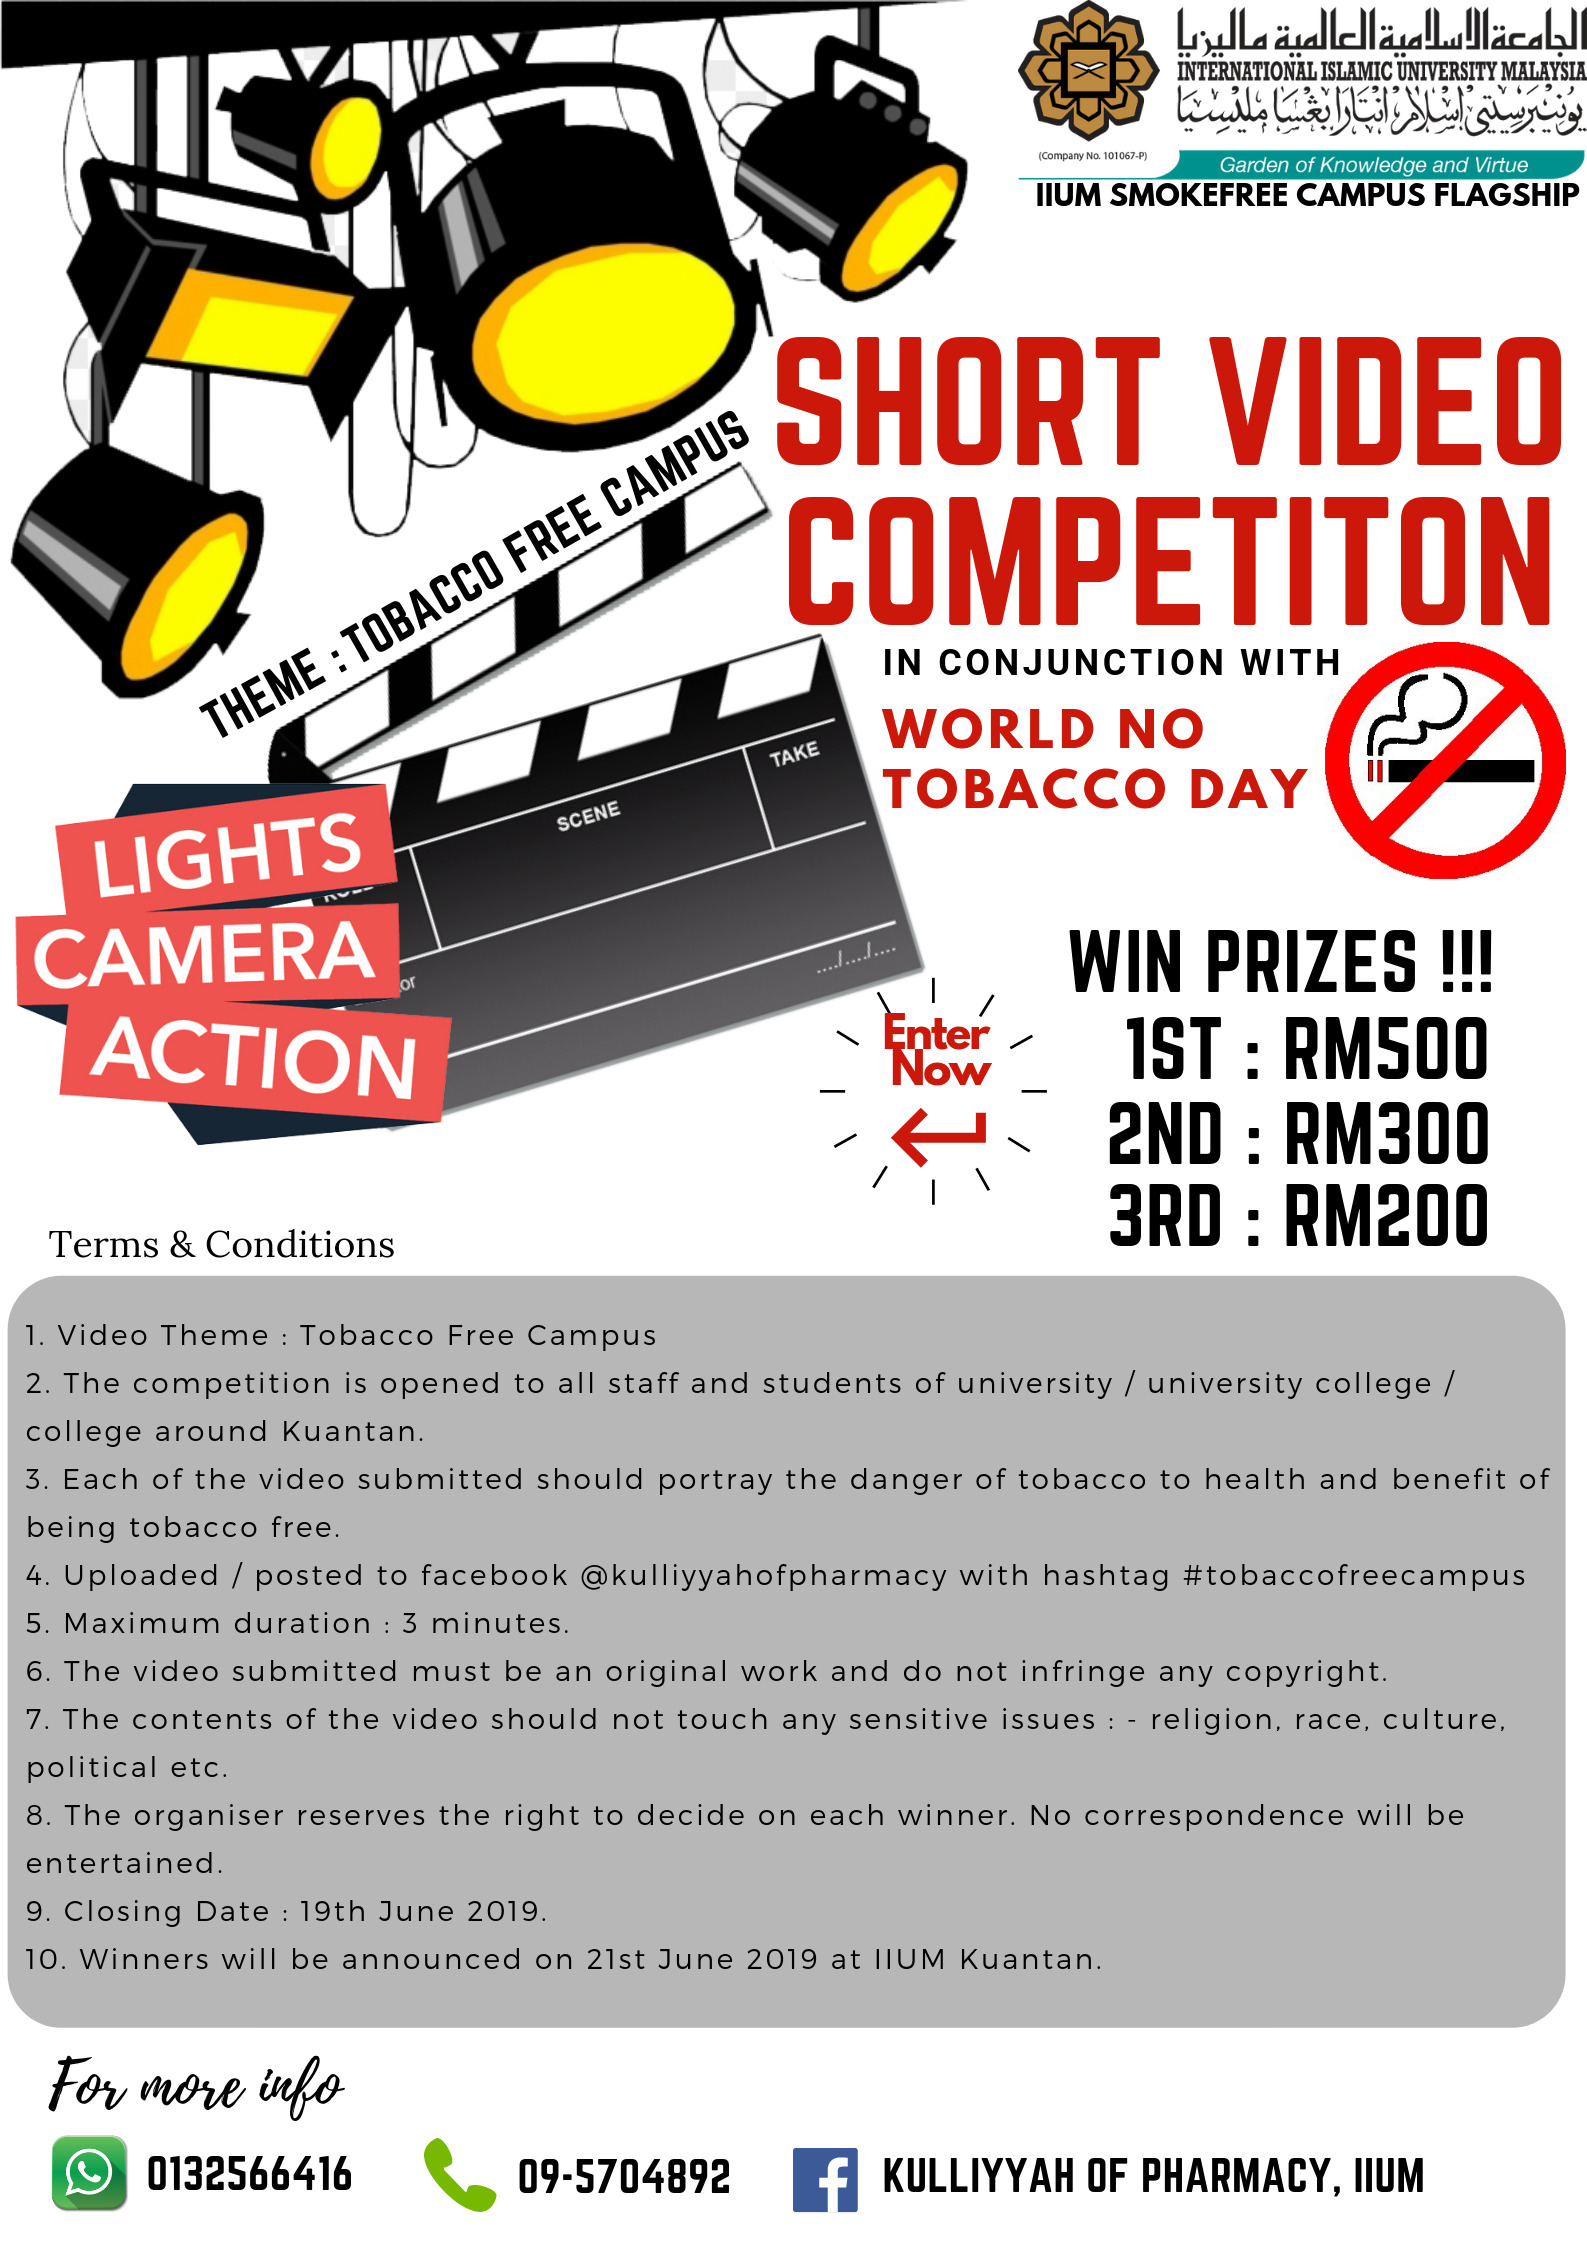 Short Video Competition in conjuction with World No Tobacco Day 2019, IIUM Kuantan